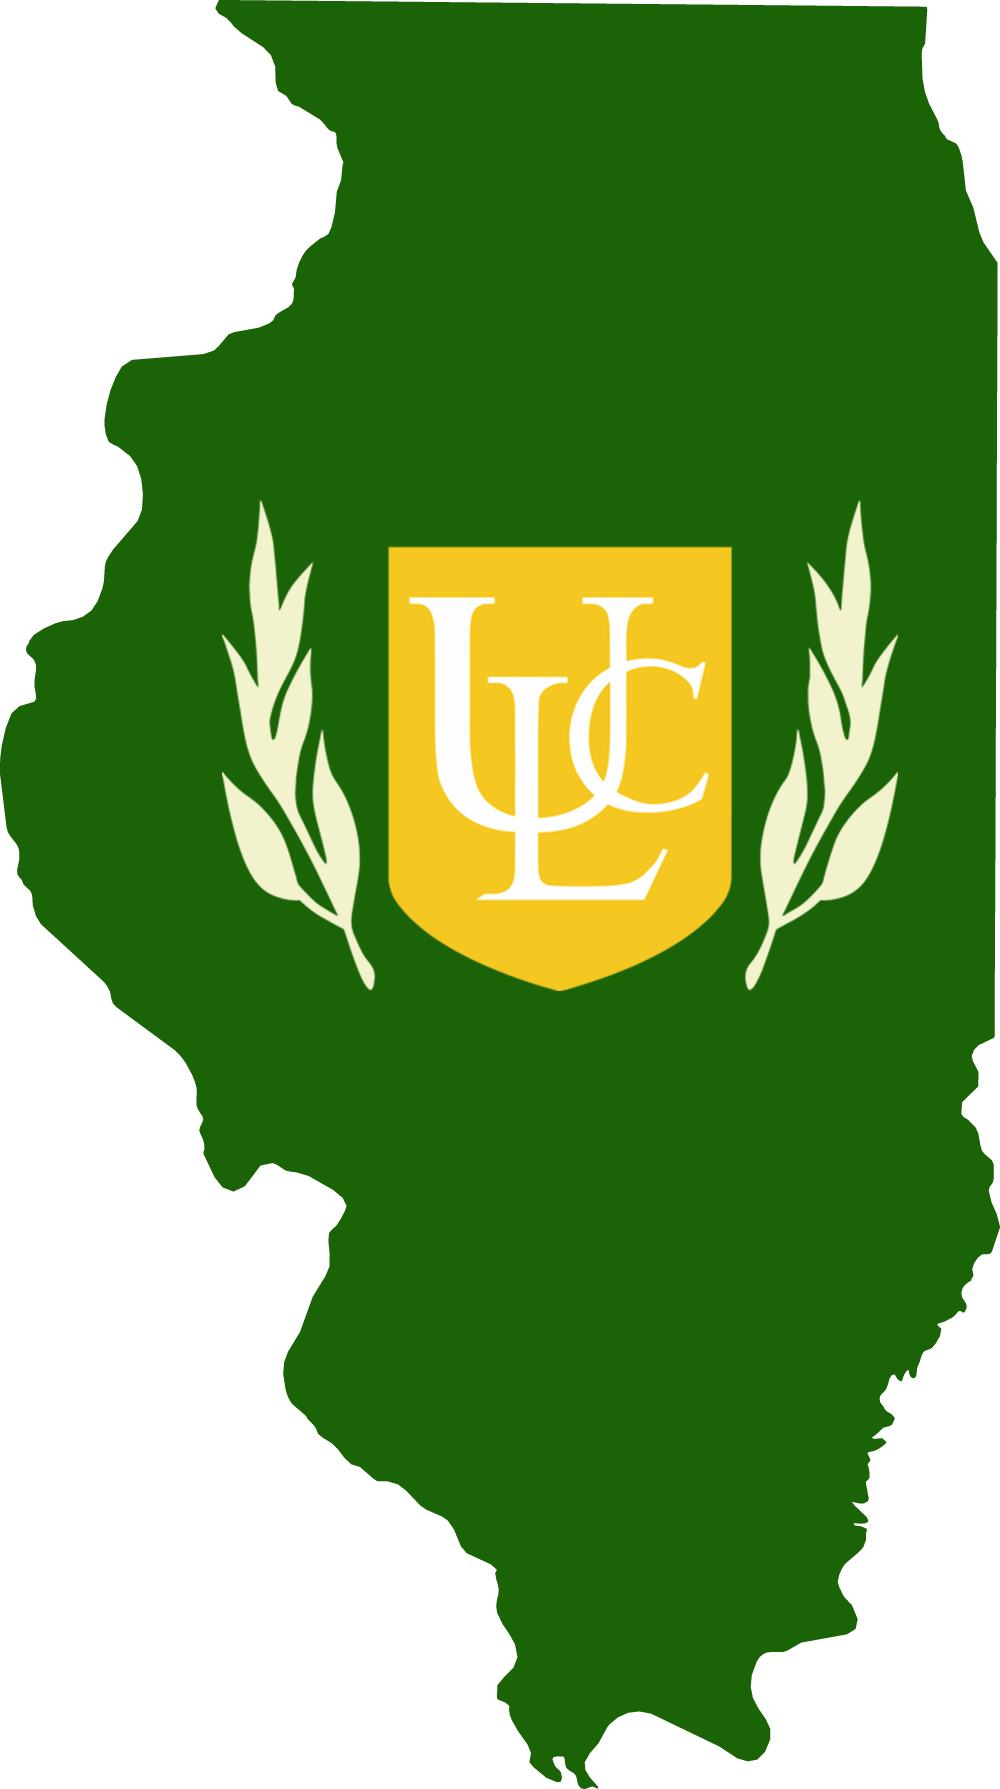 An outline of IL with the ULC logo